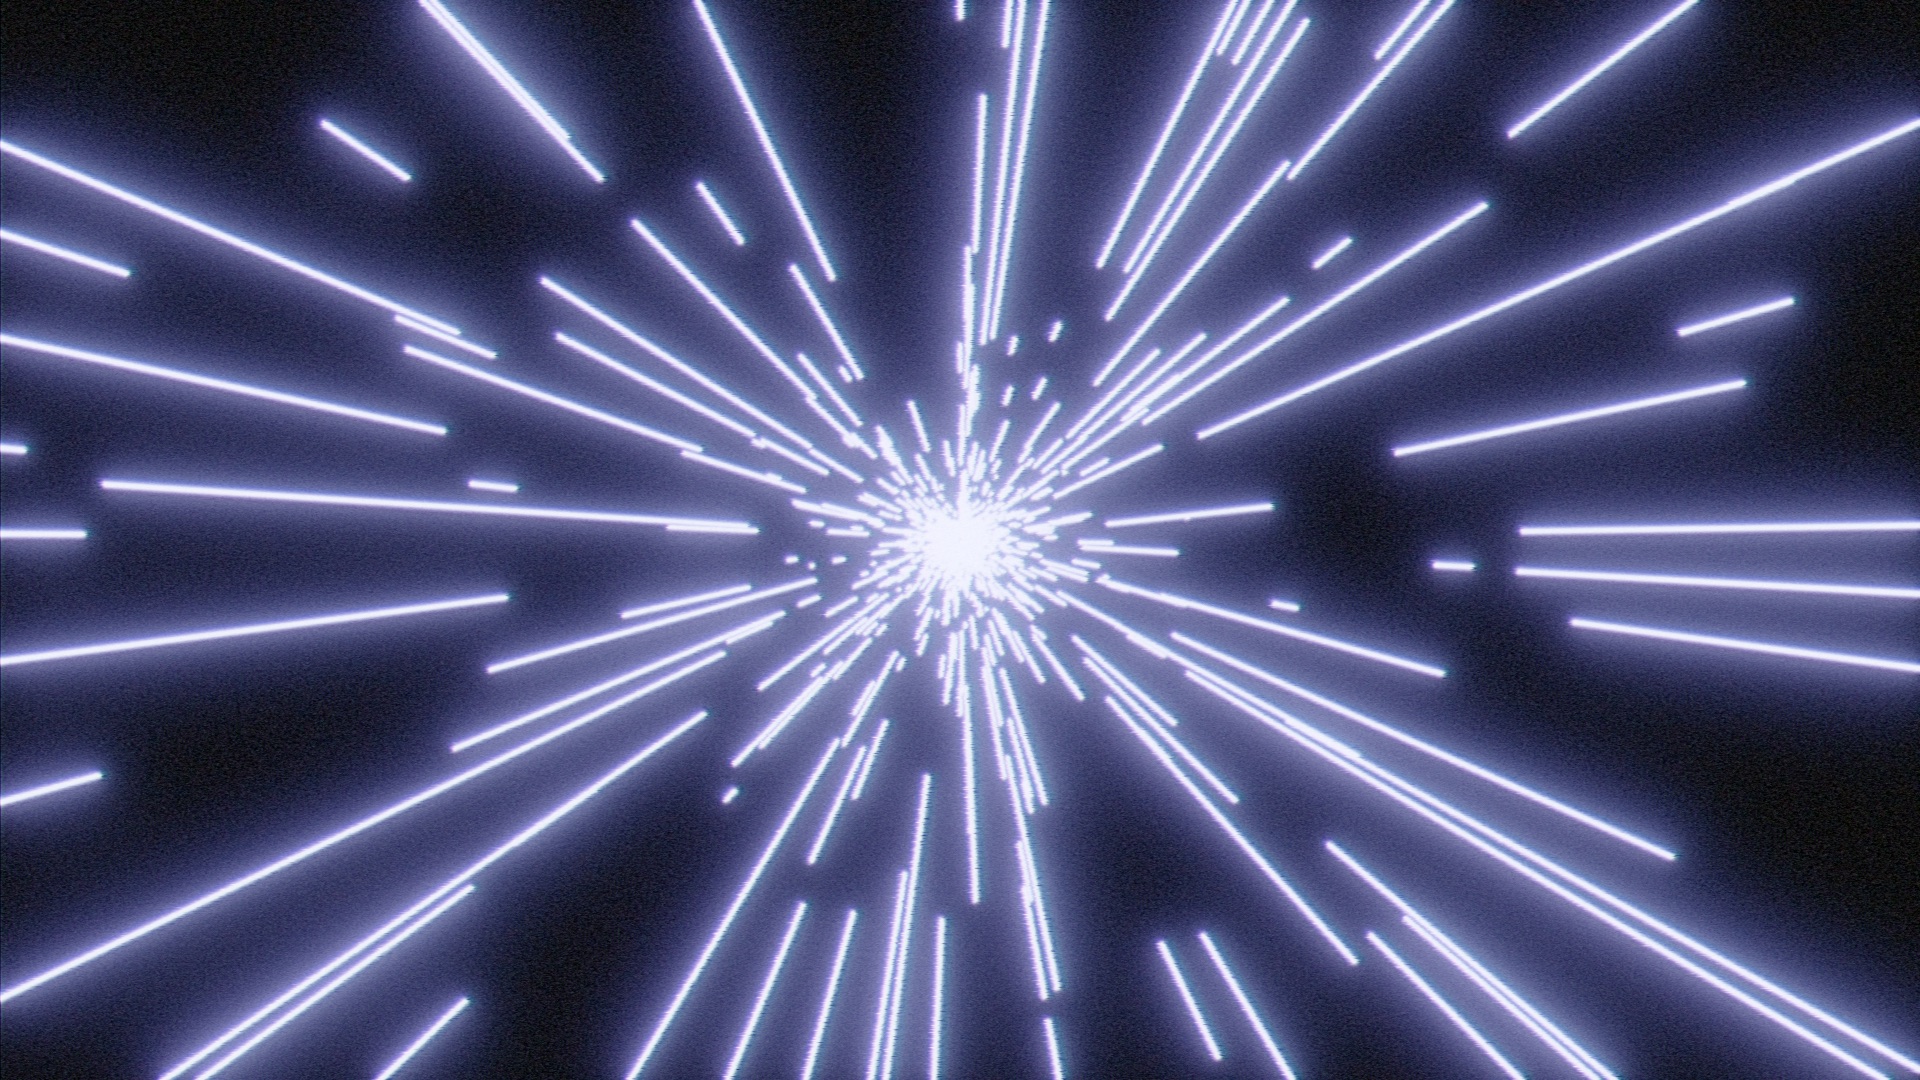 Hyperspeed space effect rendered in a 1980s CG line art style